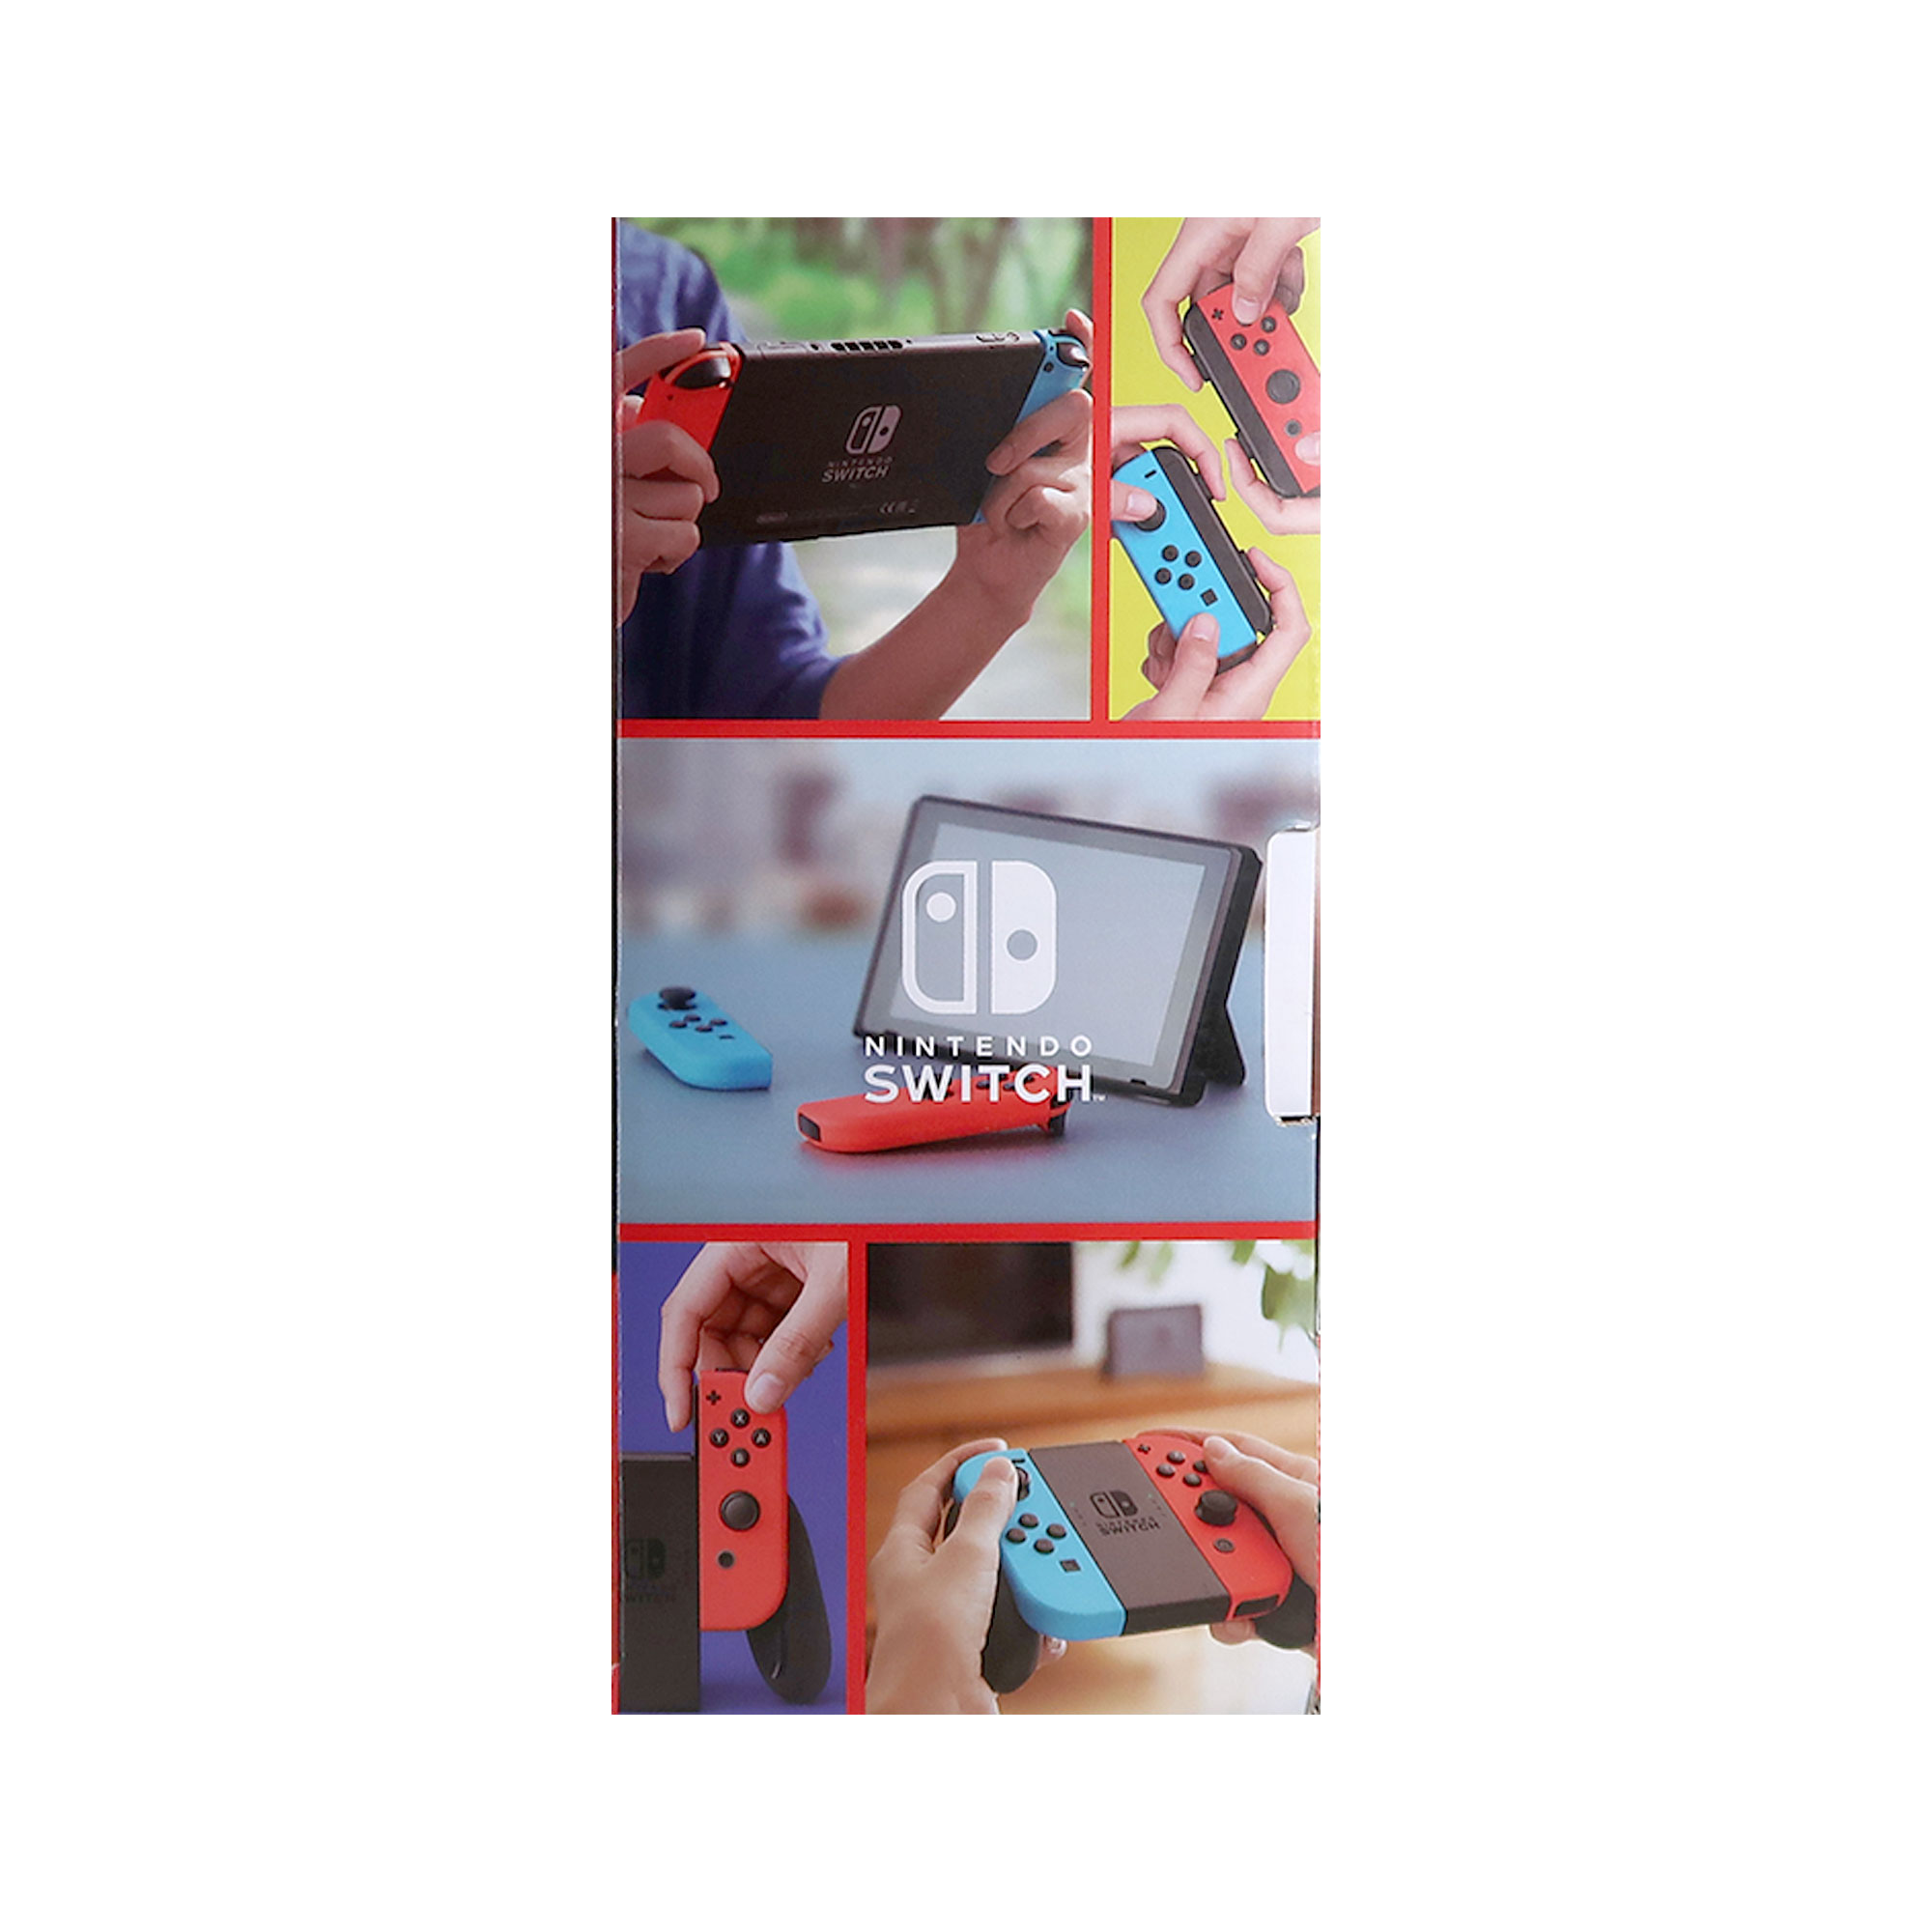 Nintendo Switch with Neon Blue & Neon Red Joy-Con